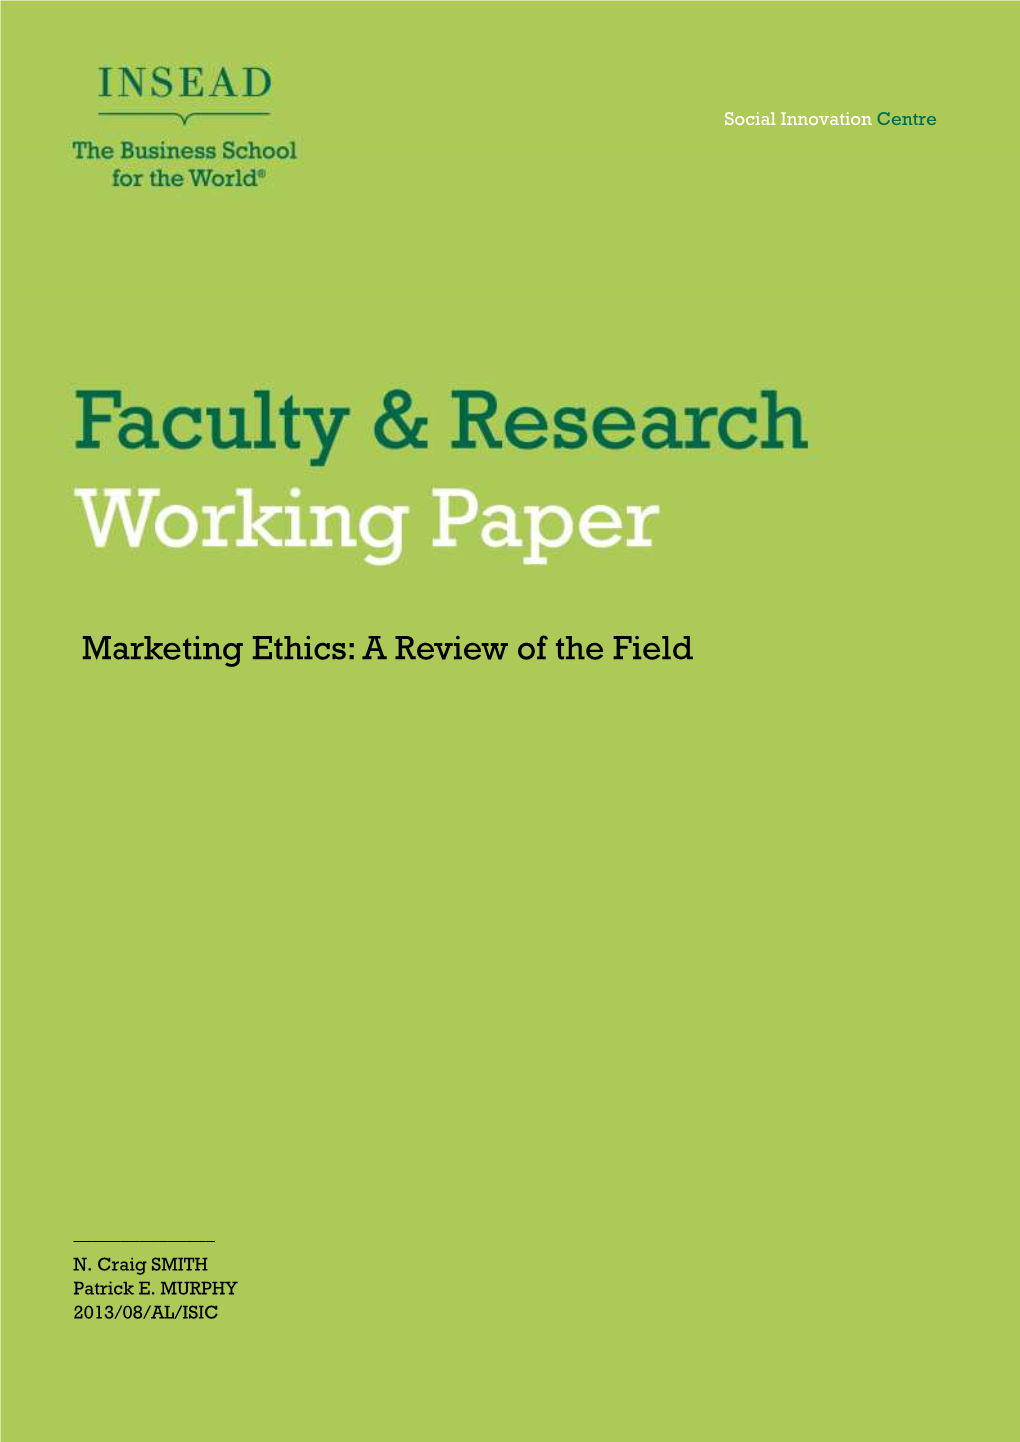 Marketing Ethics: a Review of the Field